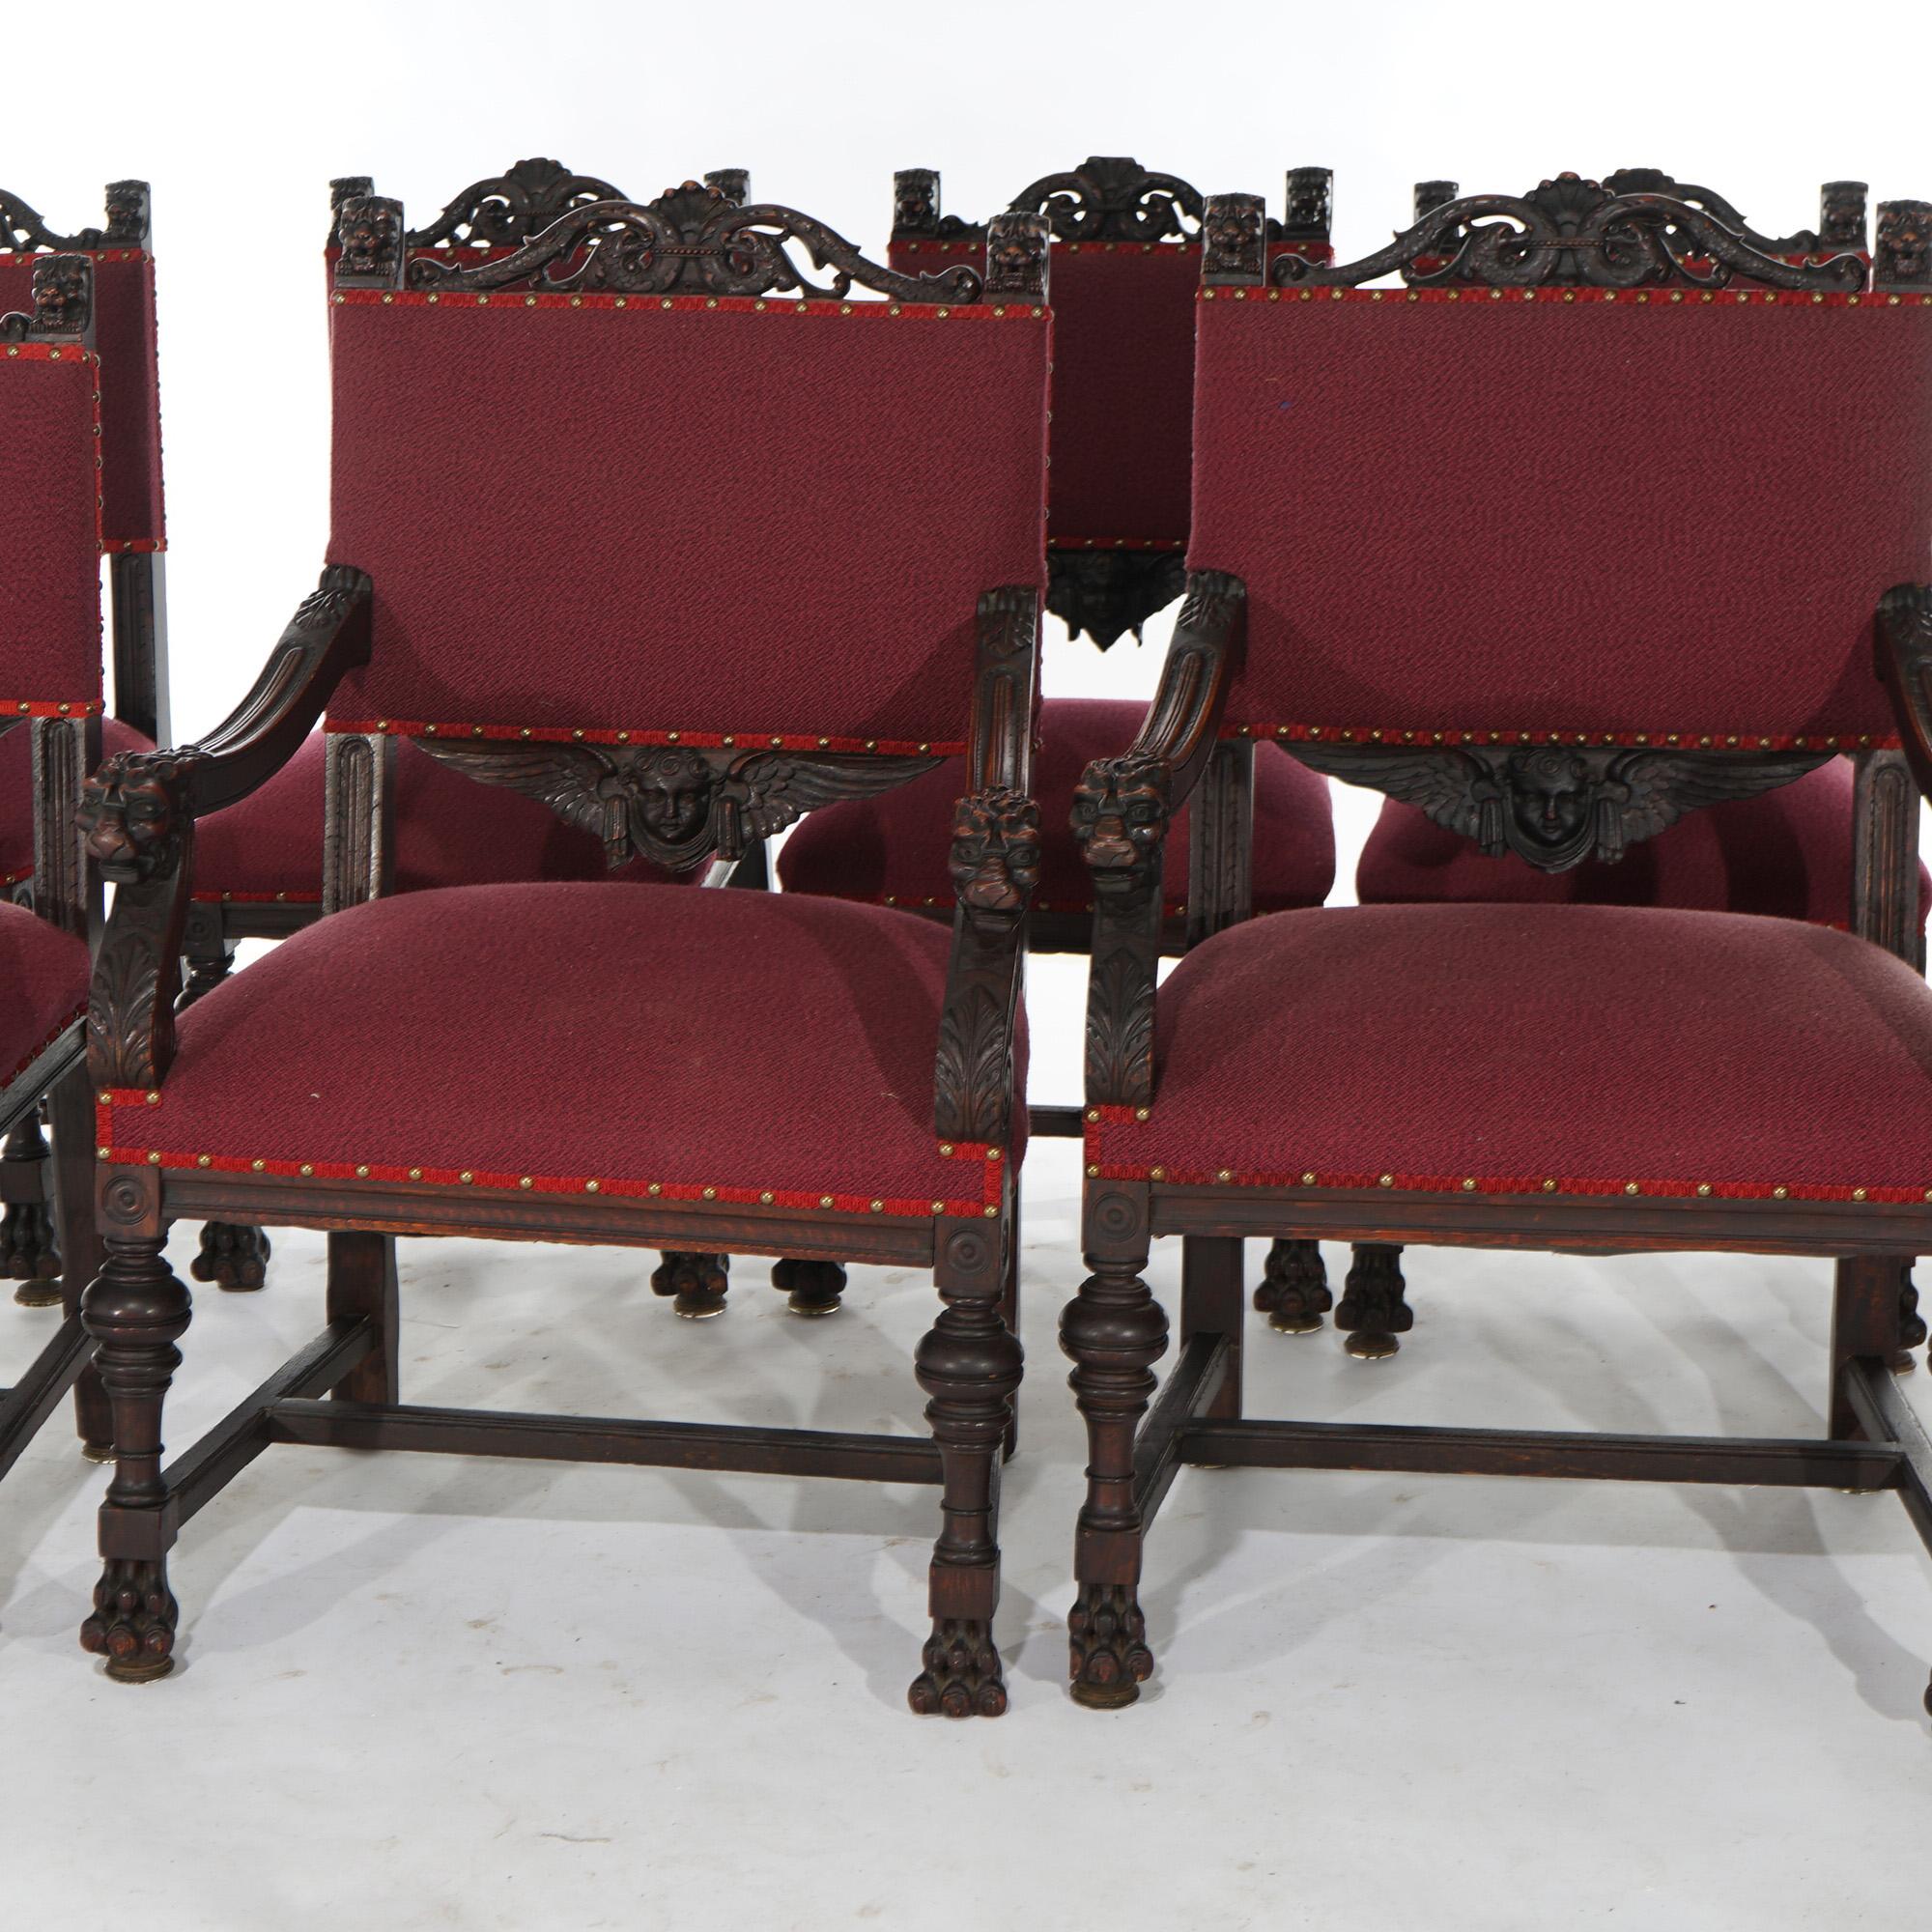 Upholstery Set Seven Figural RJ Horner Carved Oak Dining Chairs with Lion Head Arms c1900